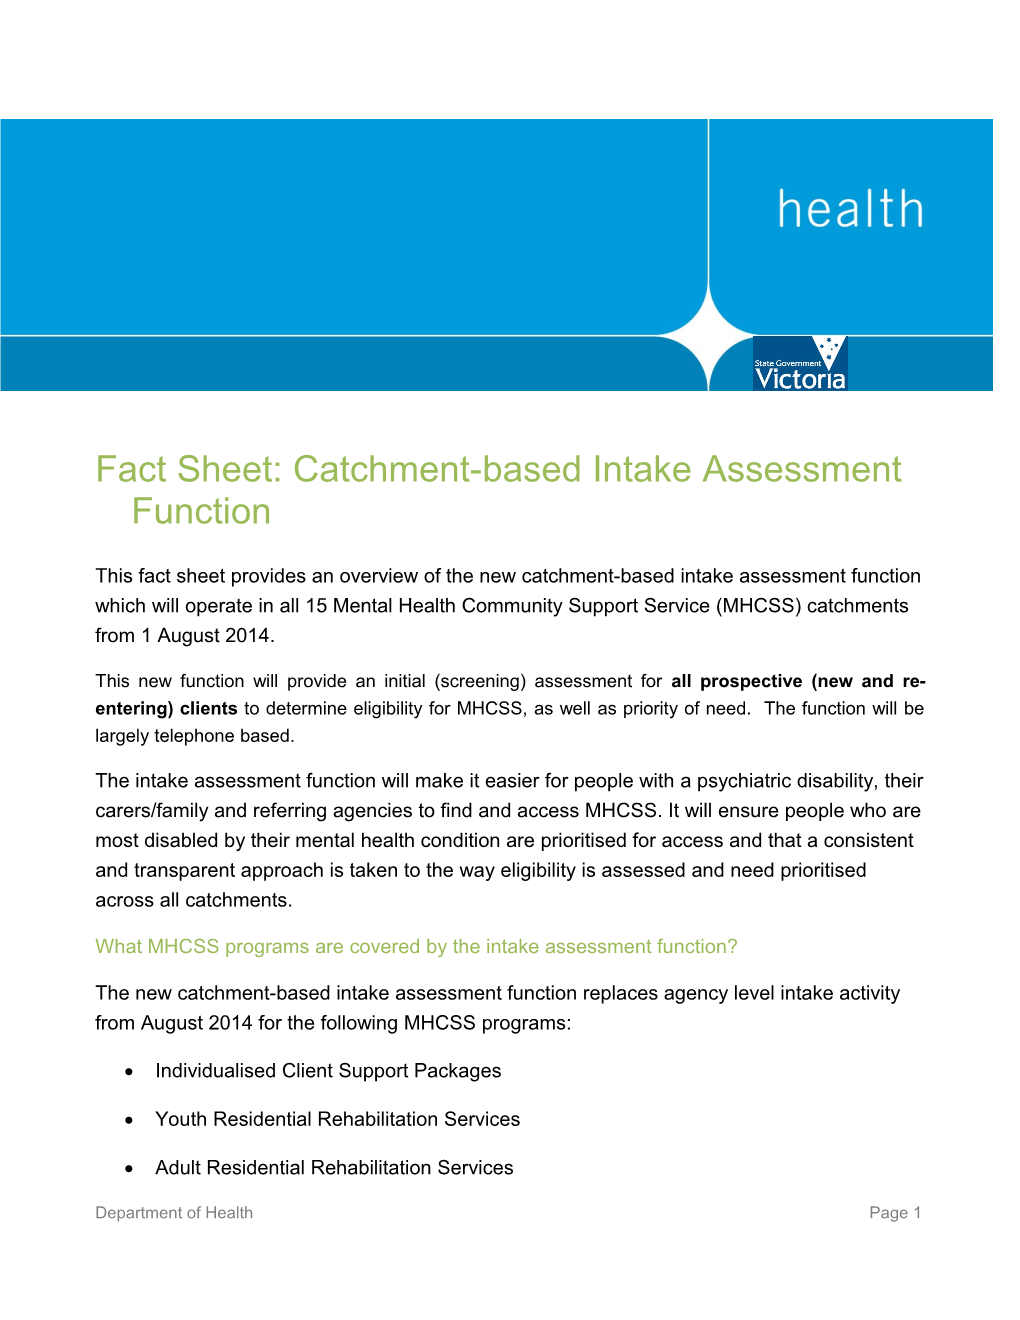 Fact Sheet: Catchment-Basedintake Assessment Function